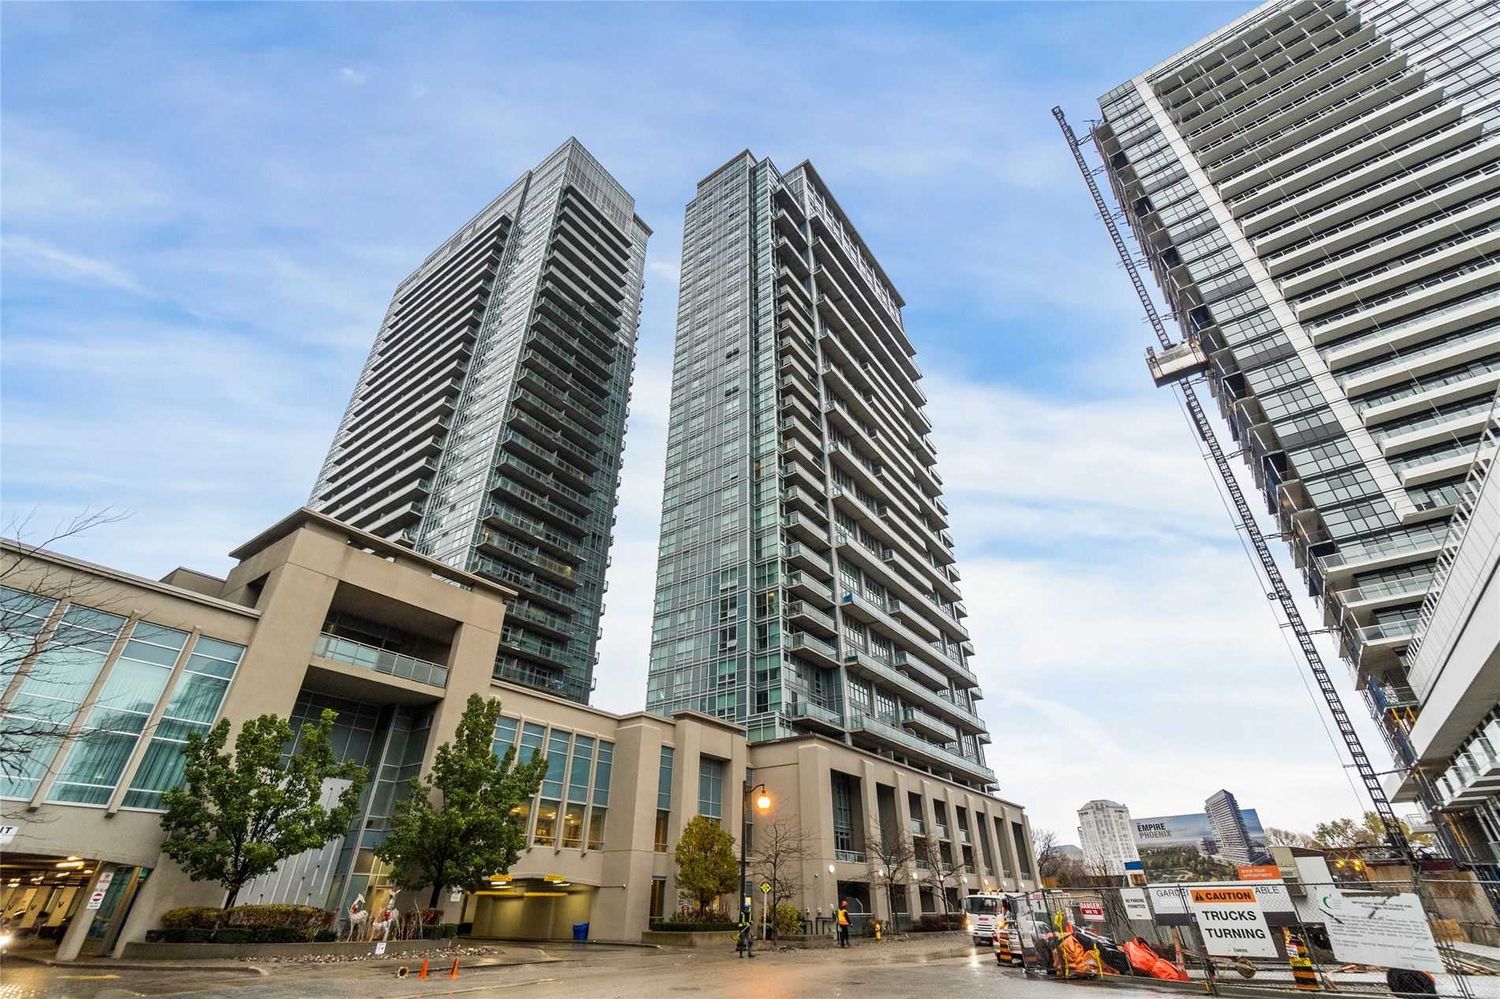 155 Legion Rd N. This condo at iLofts is located in  Etobicoke, Toronto - image #1 of 2 by Strata.ca